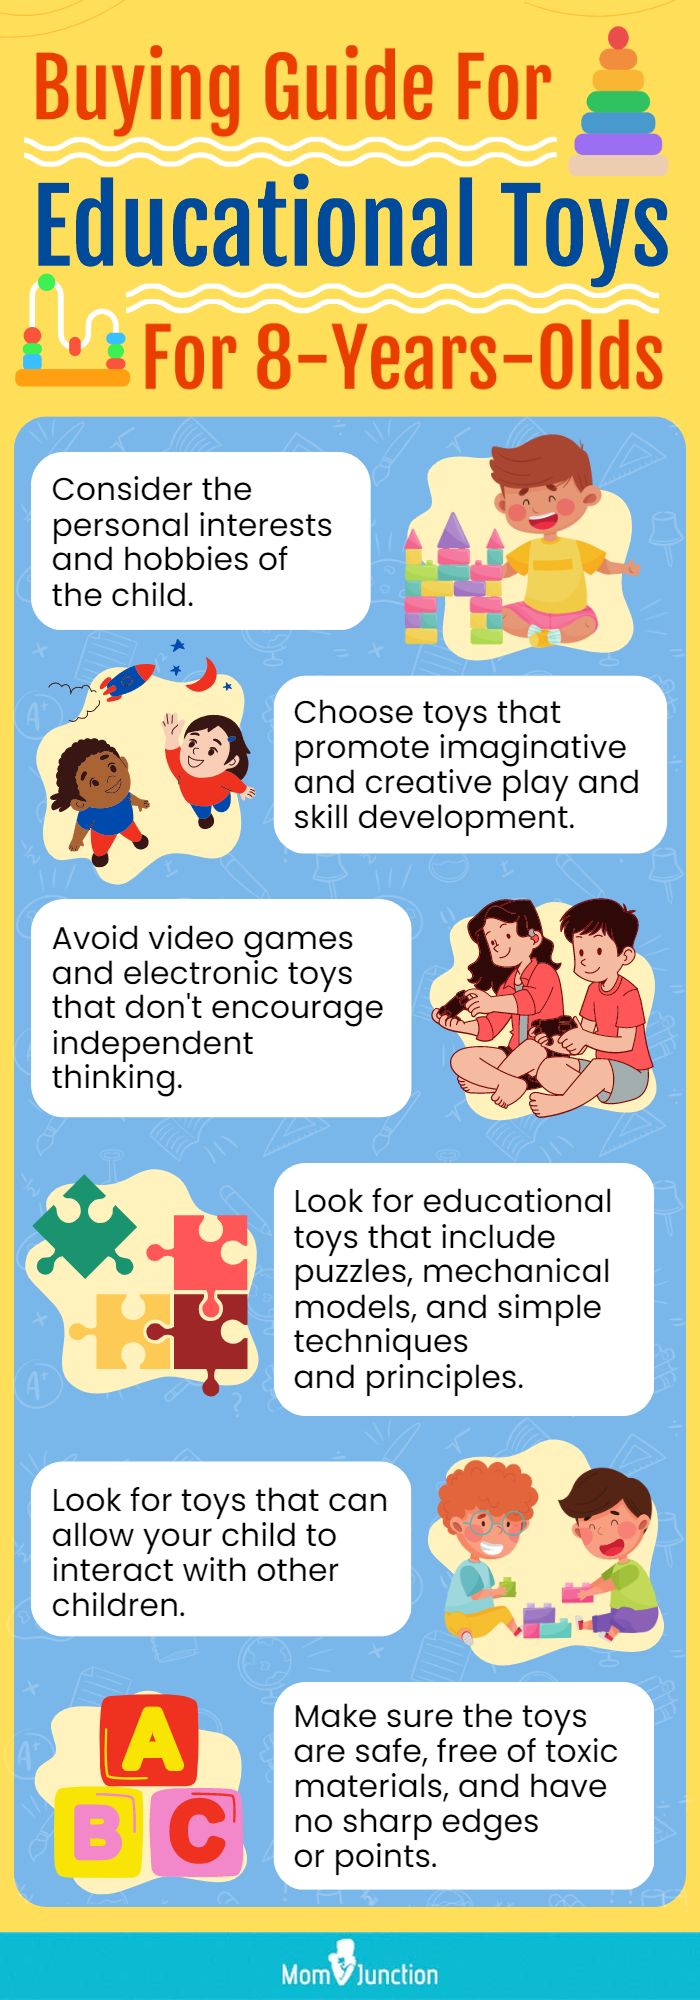 Buying Guide For Educational Toys For 8-Years-Olds (infographic)